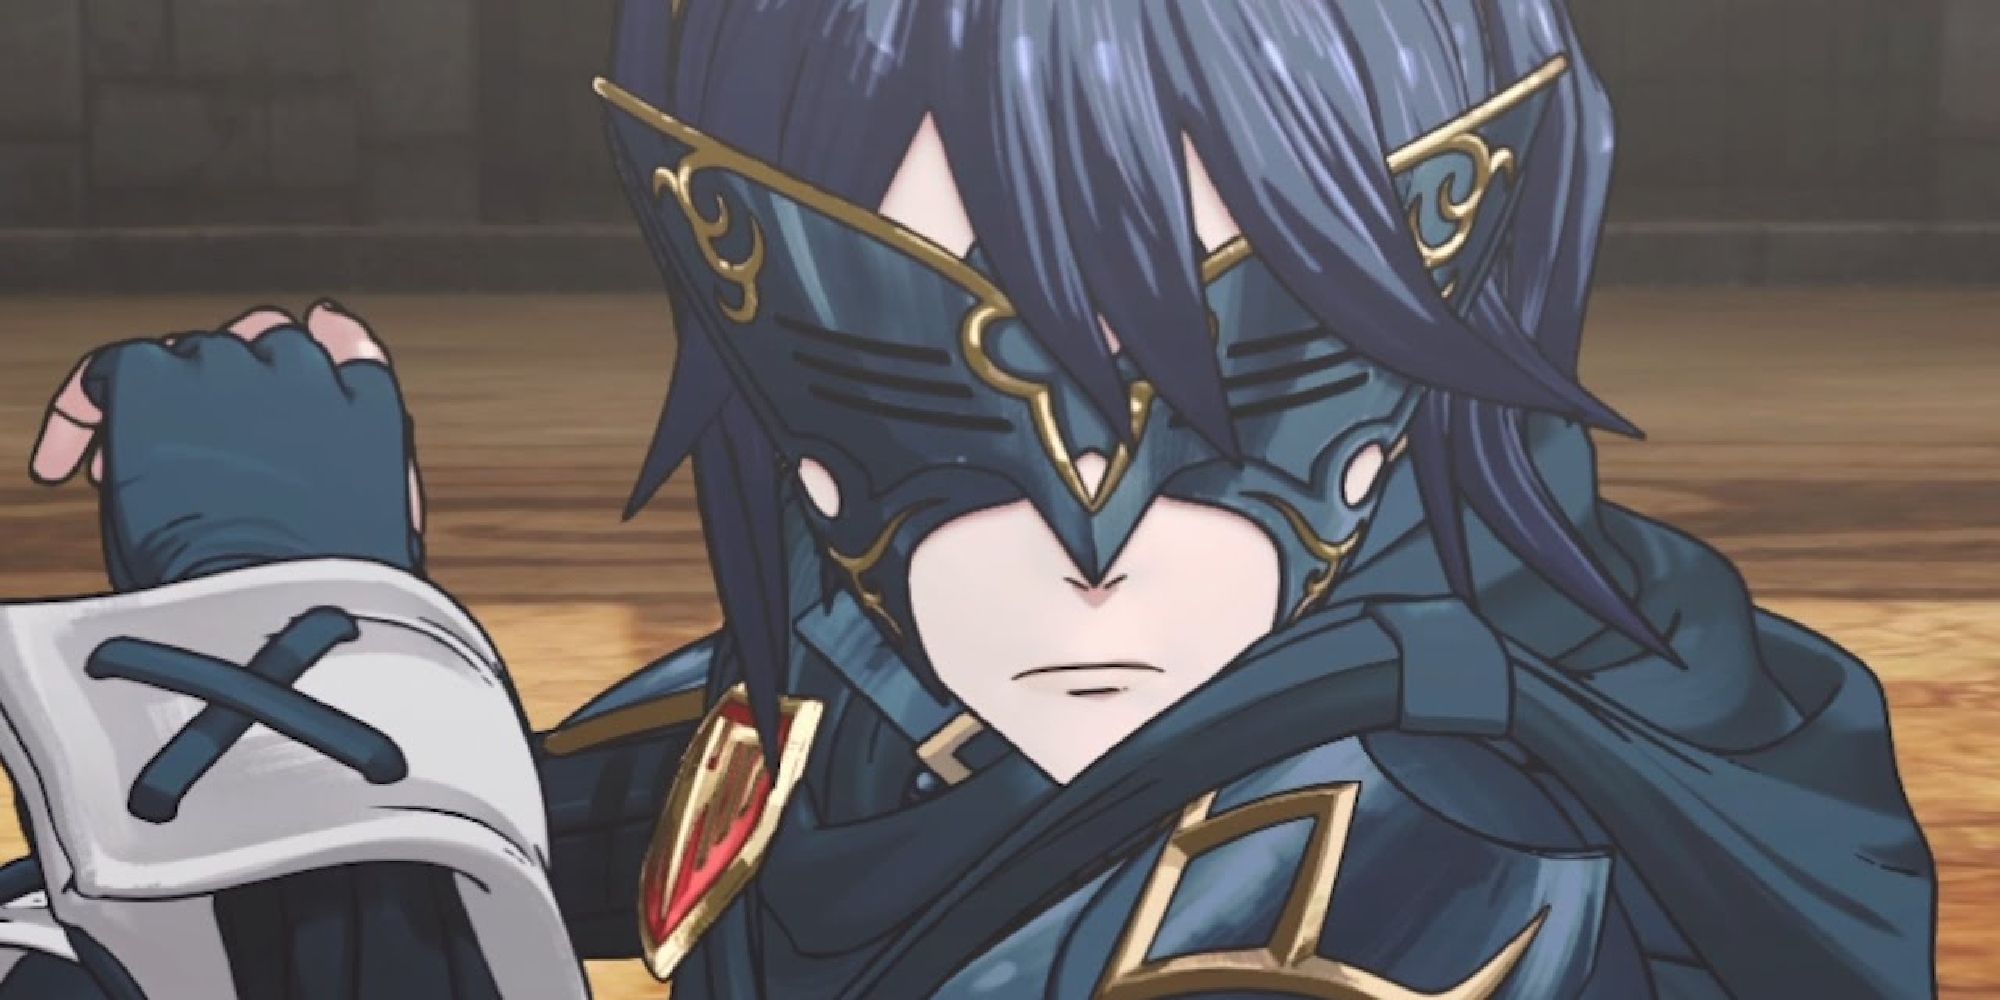 Lucina wearing her mask while masquerading as Marth in a Fire Emblem Awakening cutscene